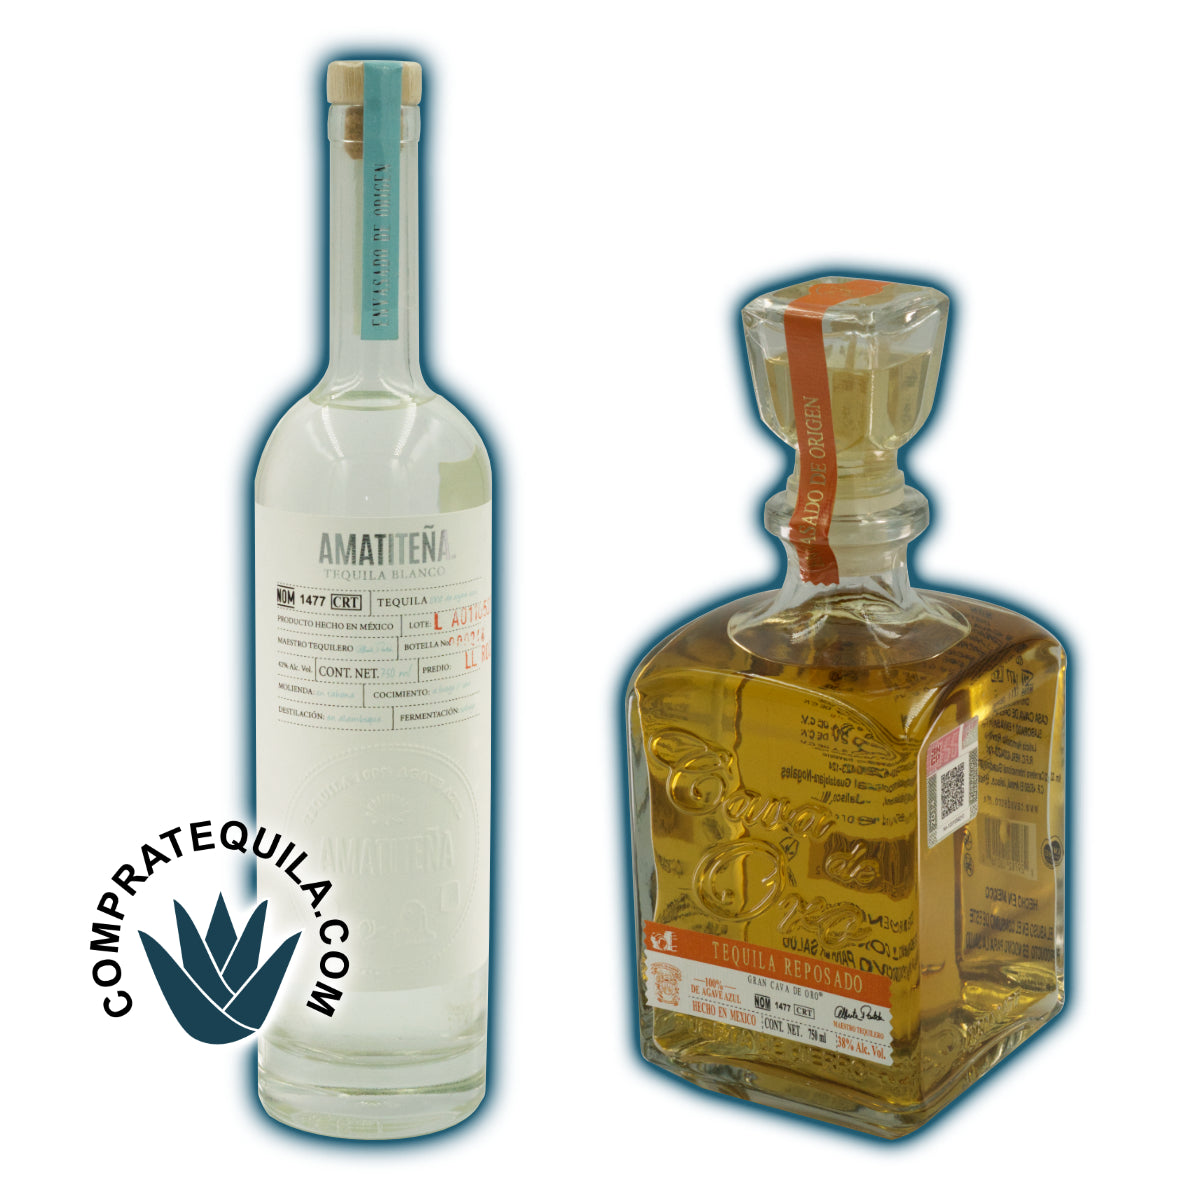 Amatiteña Blanco Tequila: Purity without additives in every sip, available at Compratequila.com